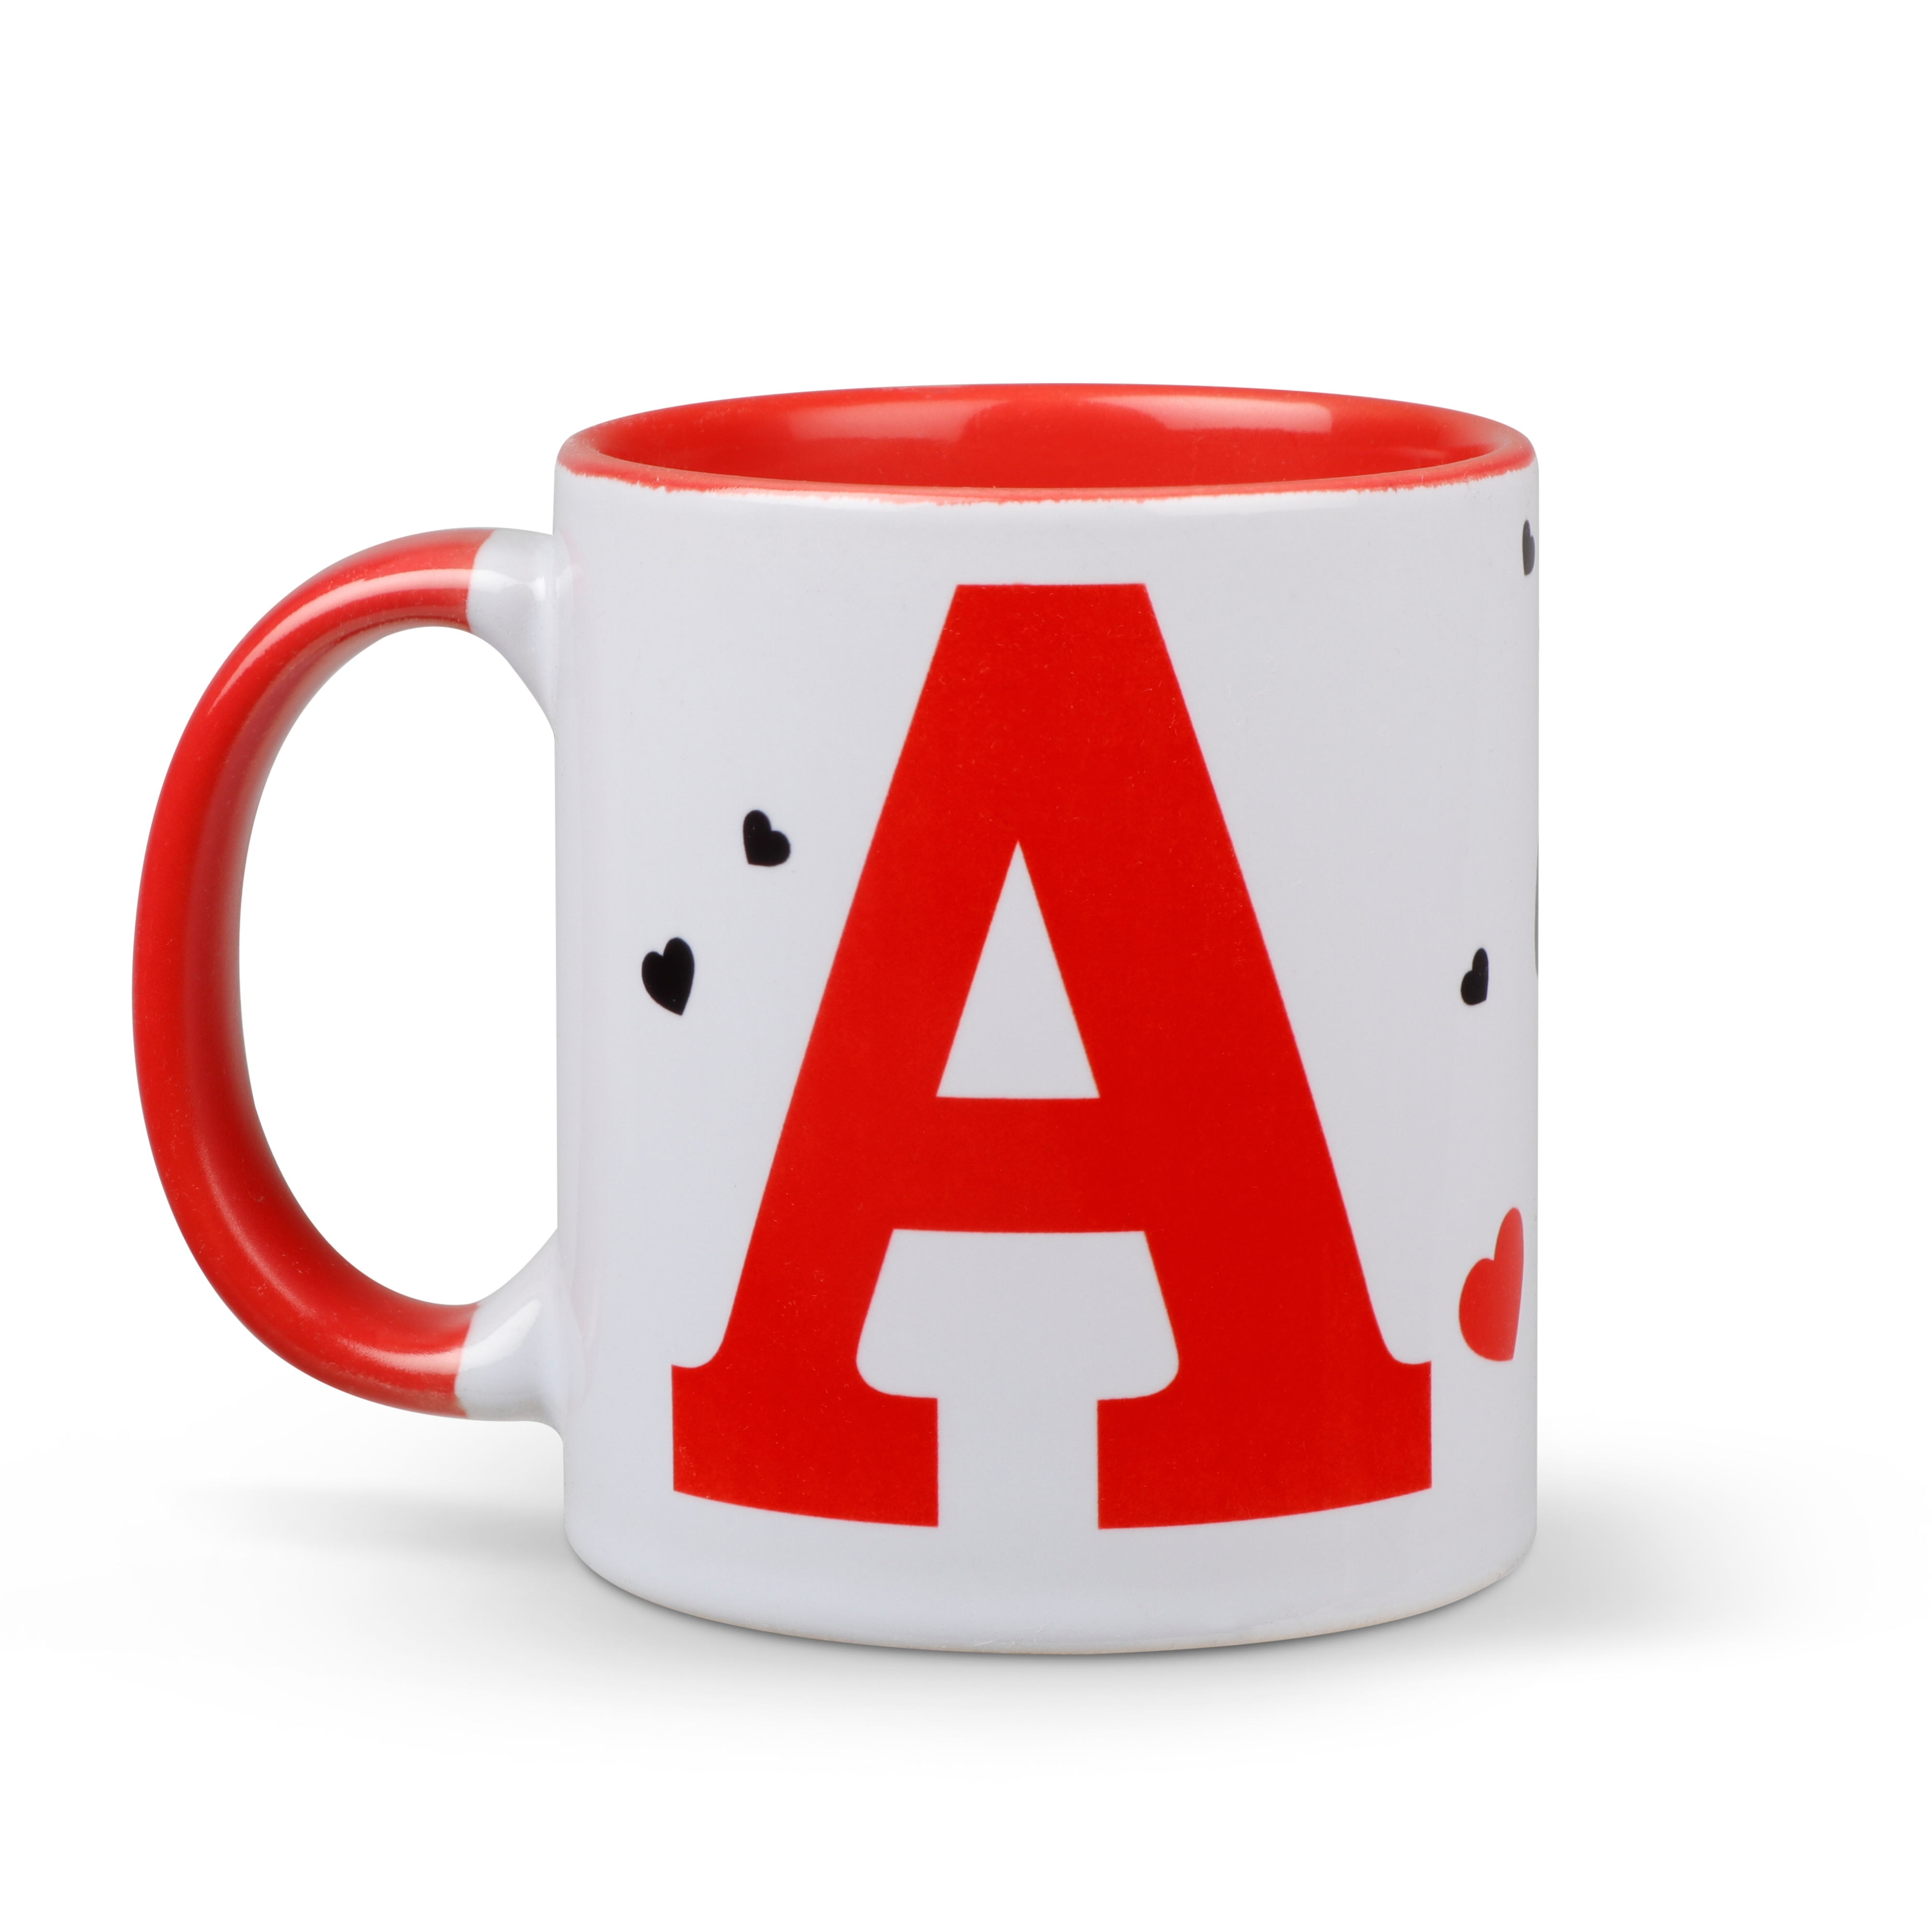 Archies | Archies KEEPSAKE MUG - A-IS FOR MY ANNIVERSIRY LOVE LAUGHTER AND MEMORIES Mug Coffee Cup White Printed Ceramic Gift  (12 x 11 x 9) (350 ml) 0